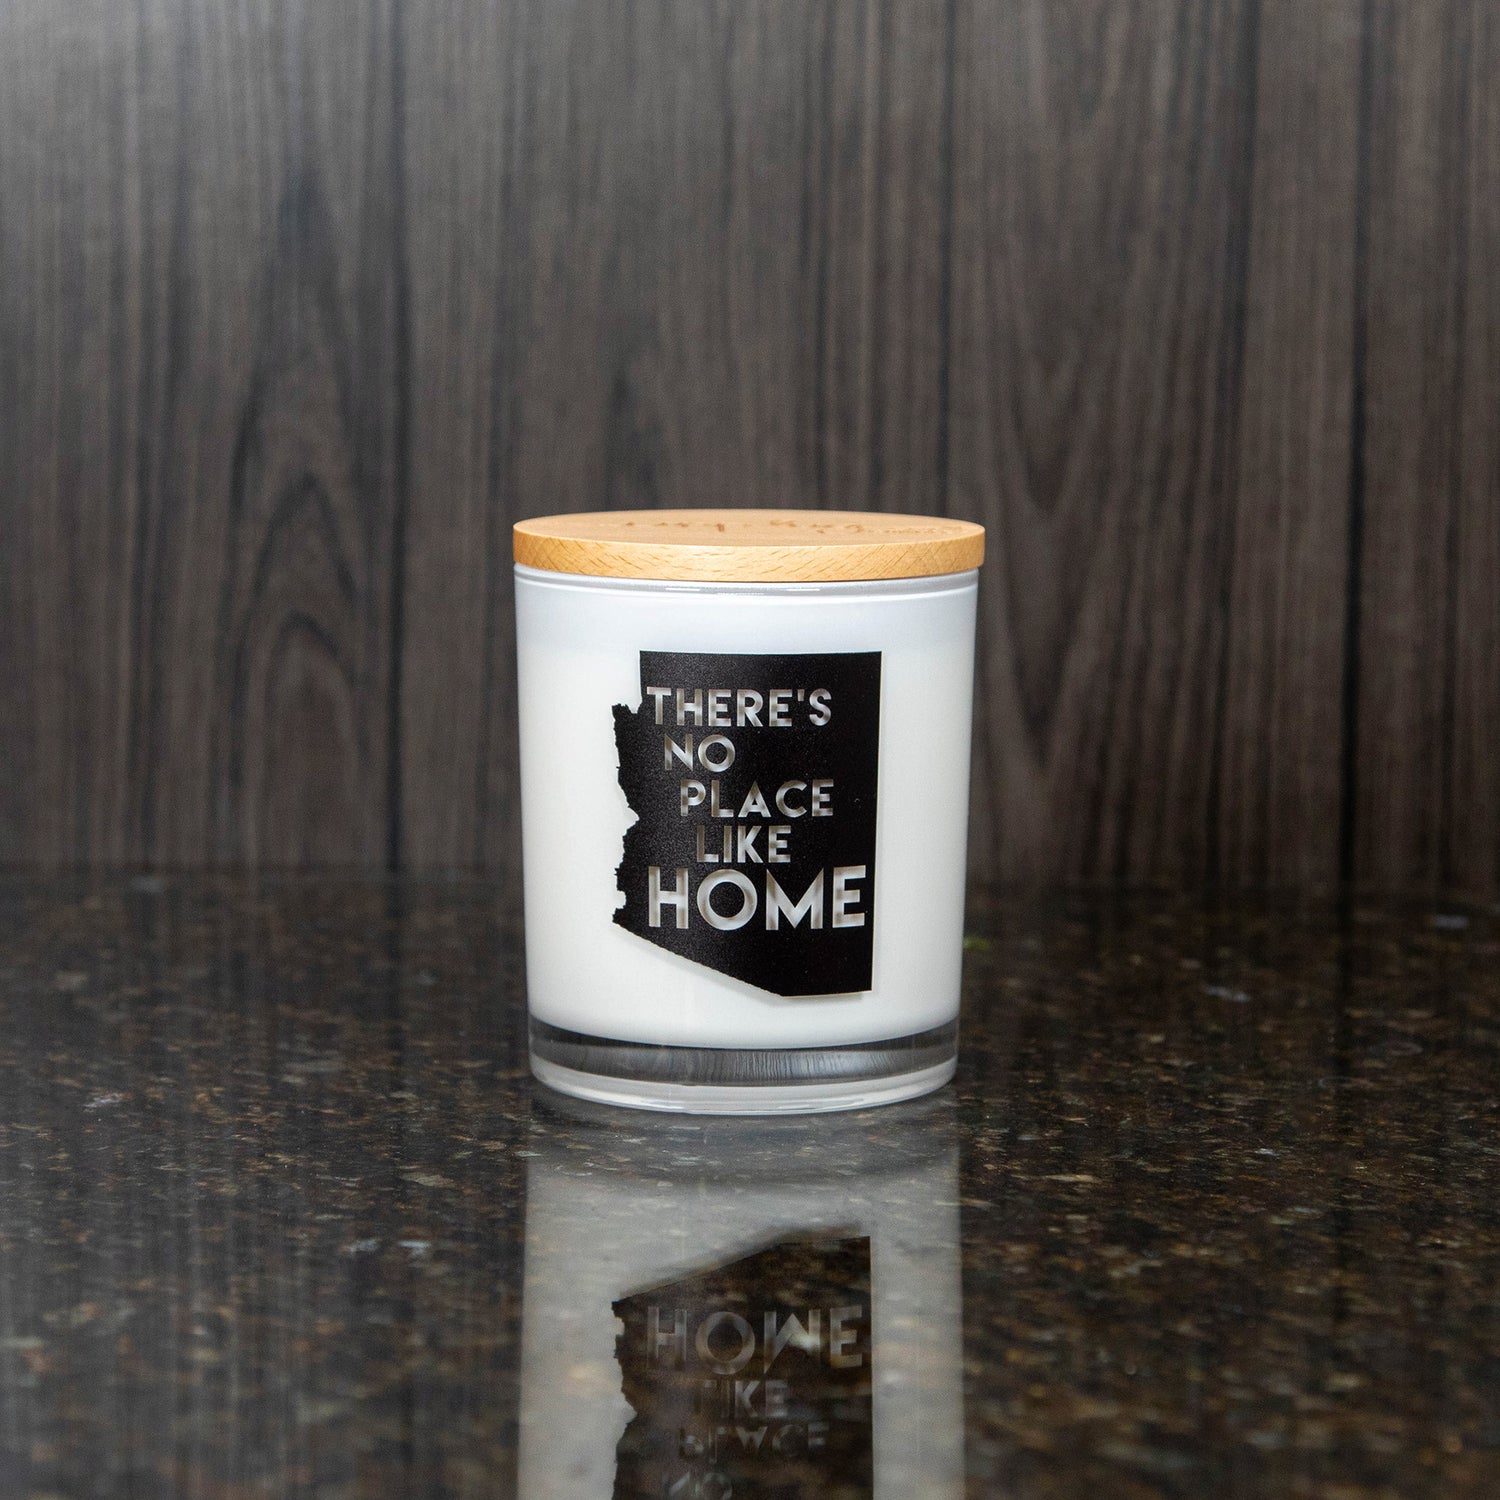 a white candle with a print of the shape of Arizona was "there's no place like home" written in it